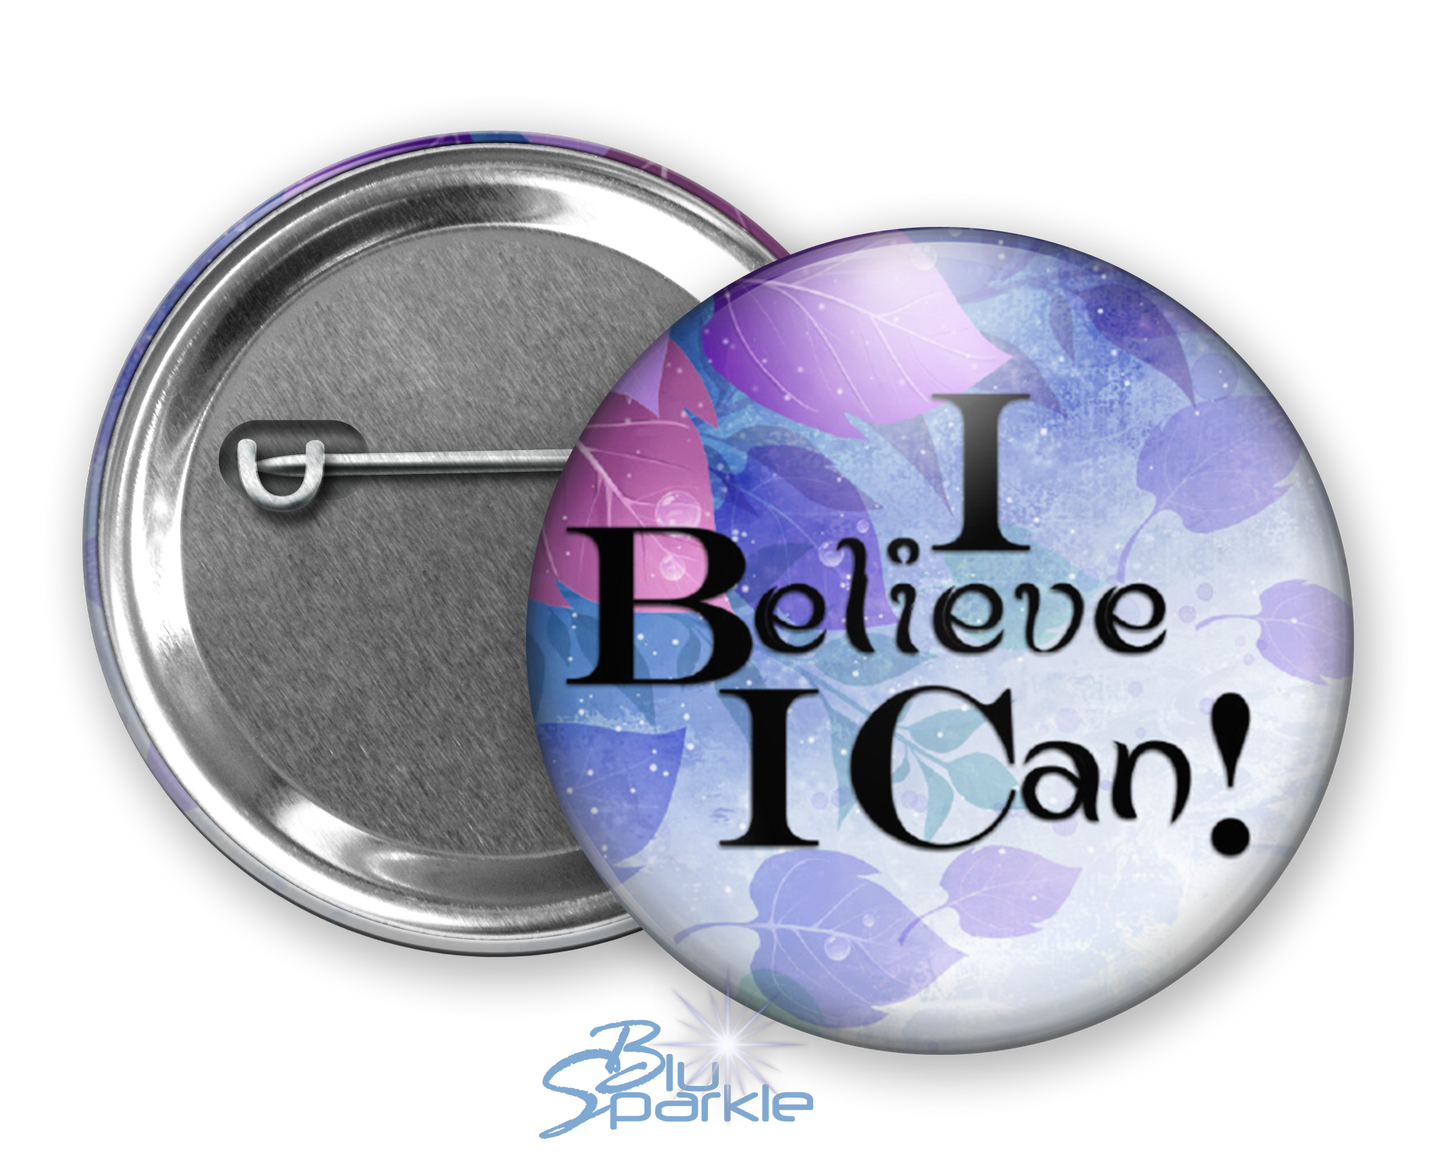 I Believe I Can - Pinback Buttons